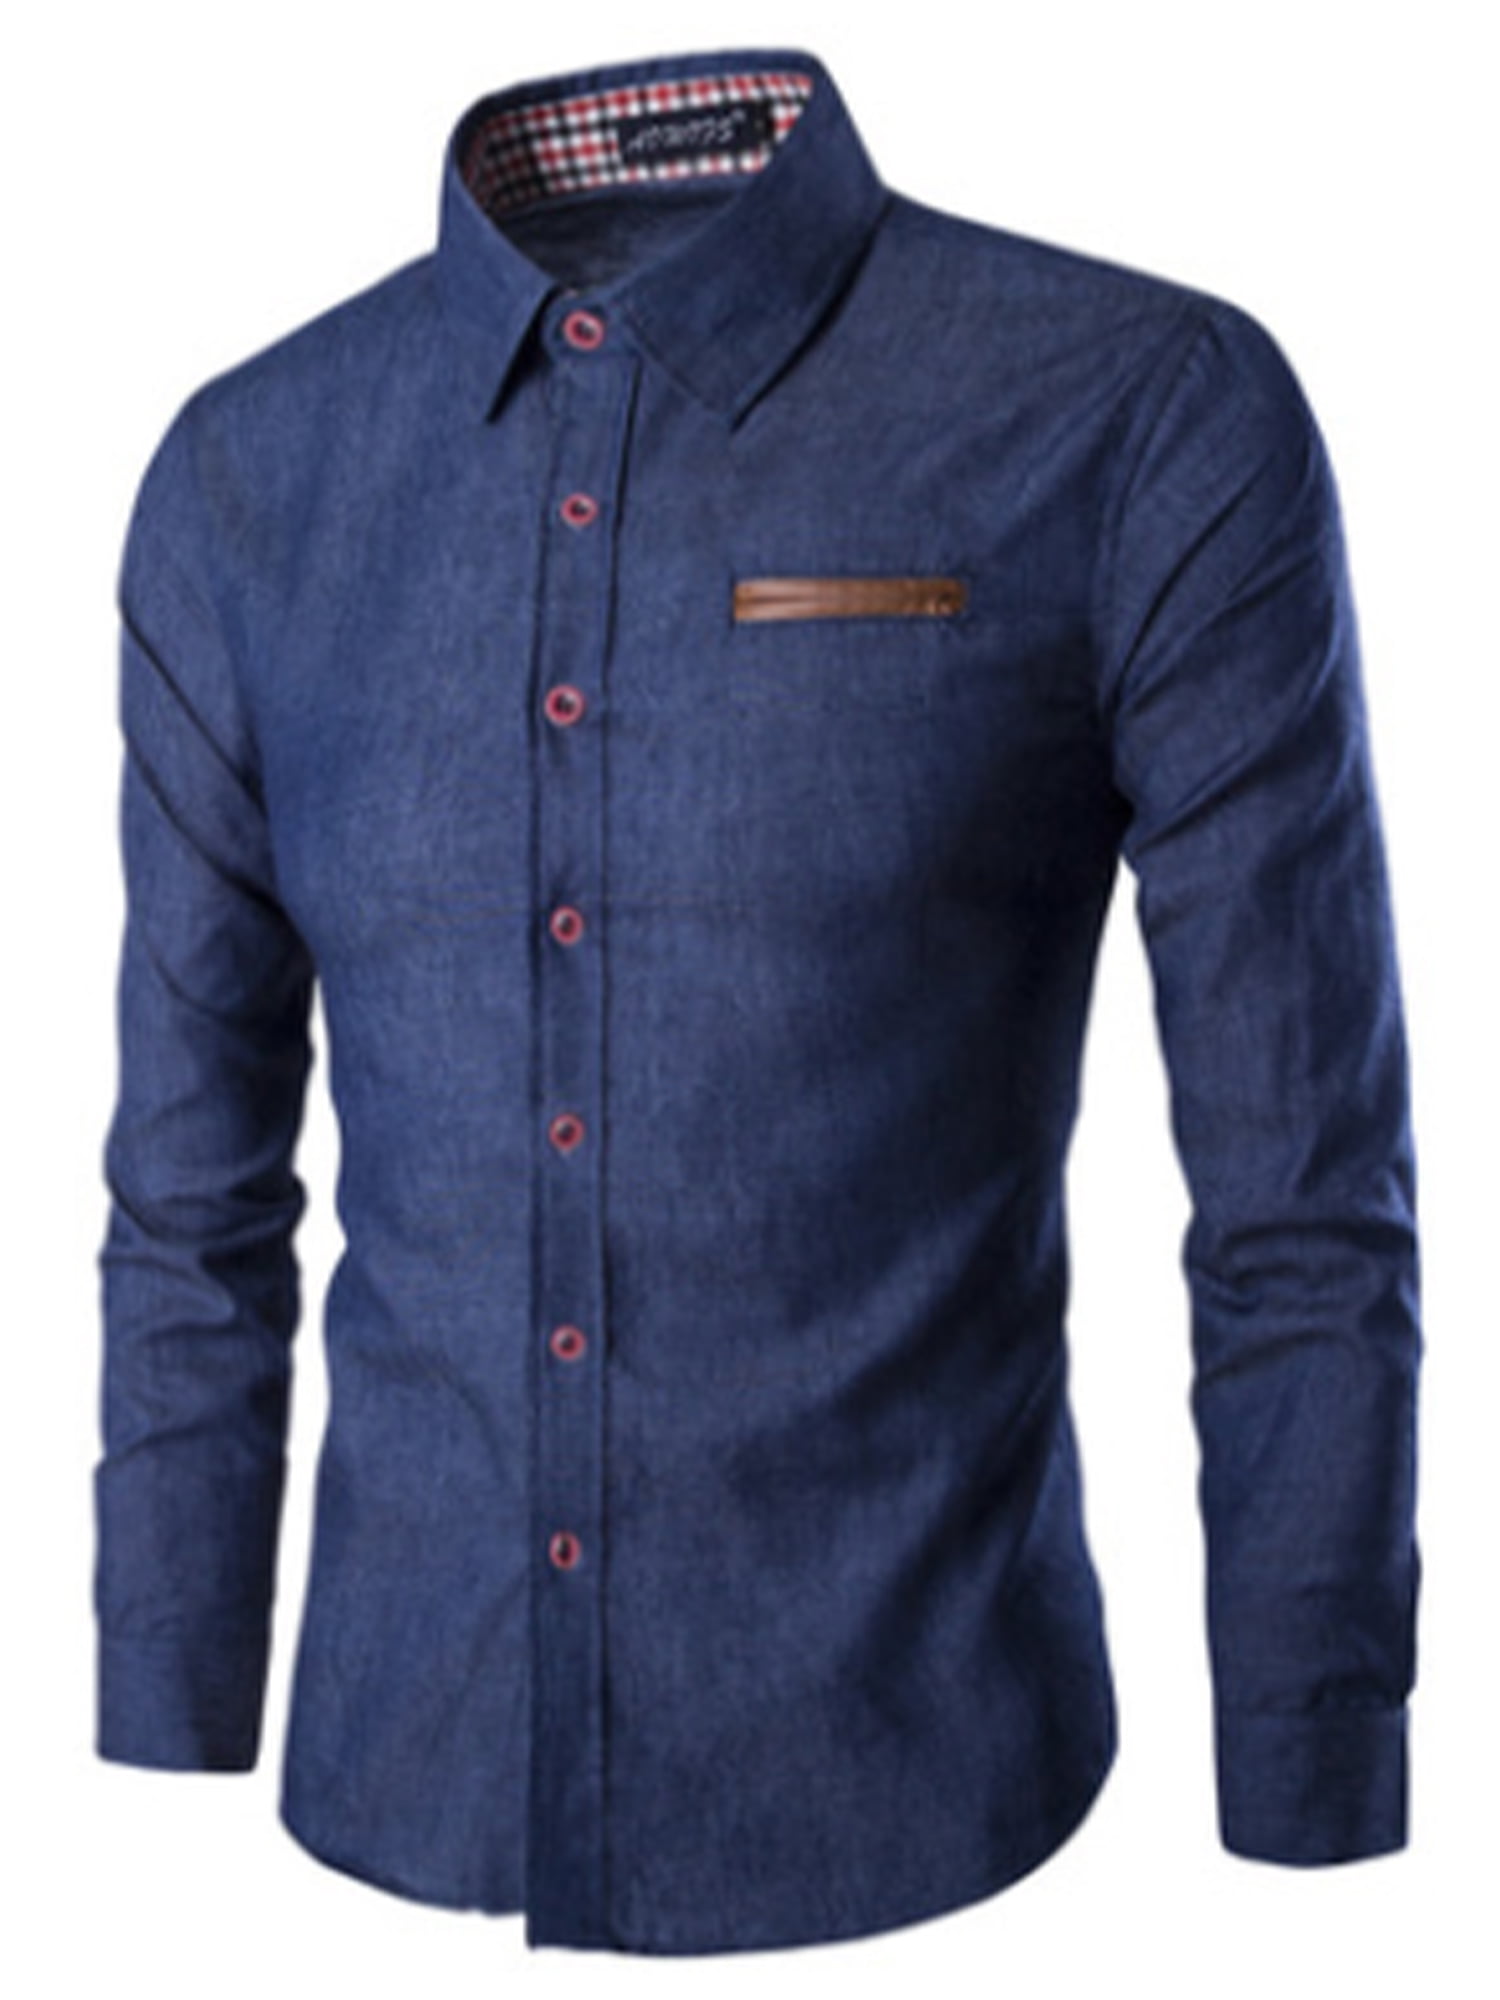 Casual style for men. Denim jeans and blue shirt combo. | Business casual  men, Mens fashion suits, Mens clothing styles